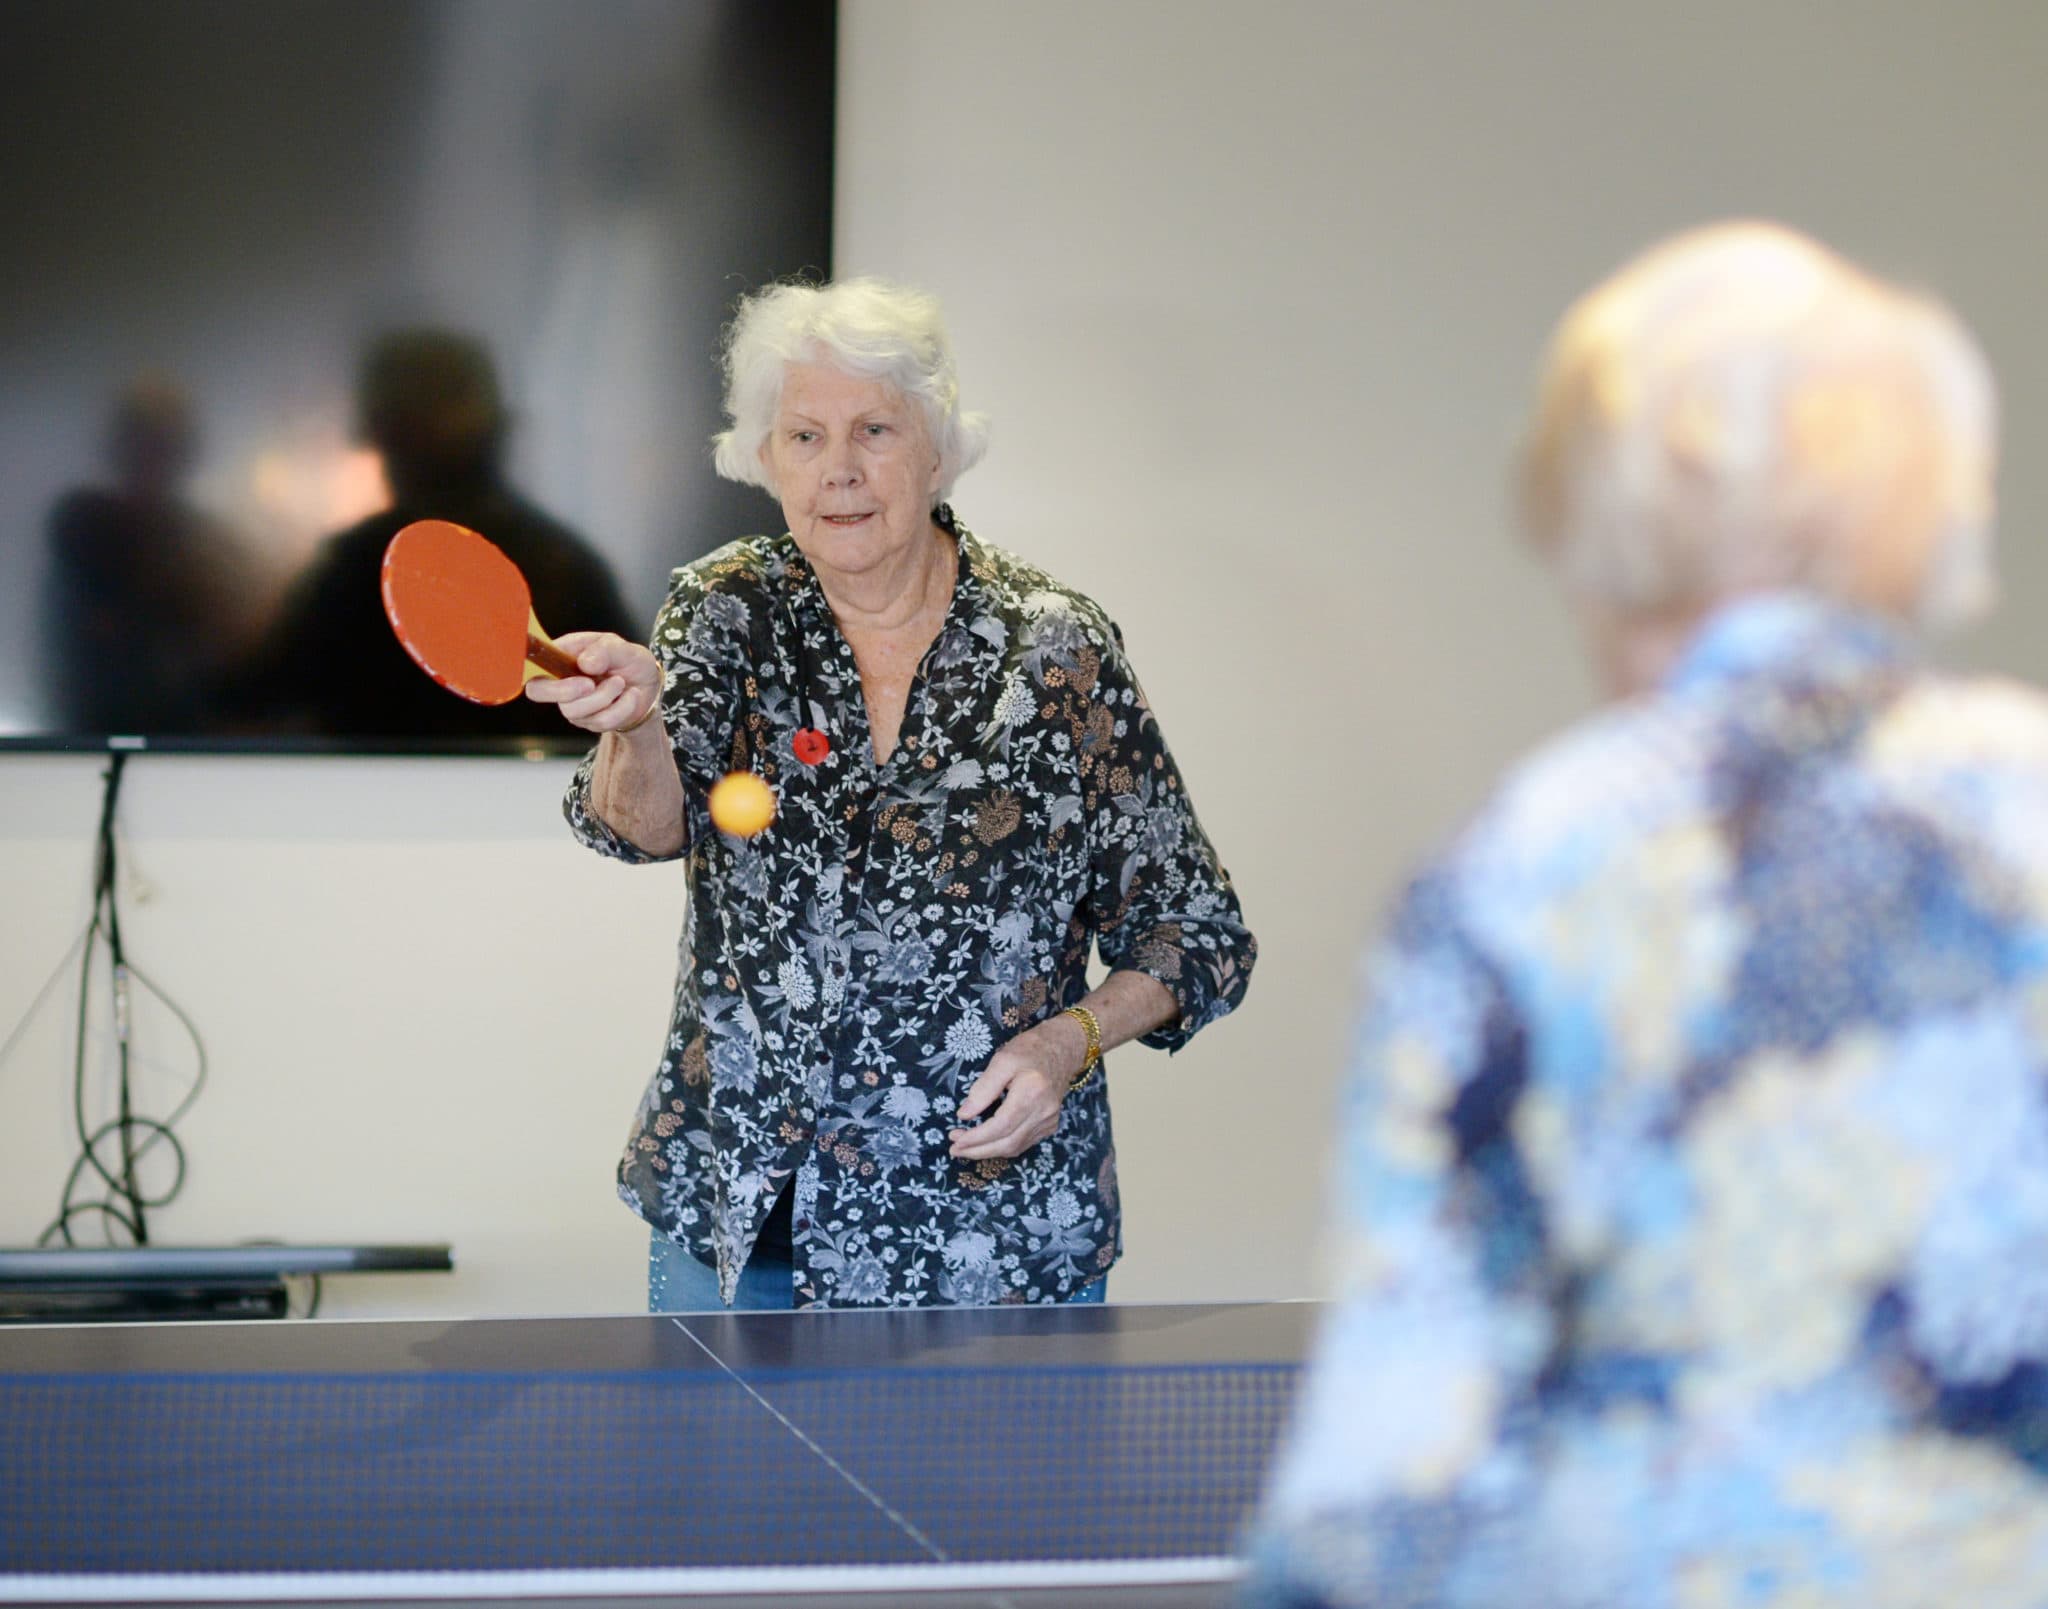 Jeanette Thompson Playing Table Tennis